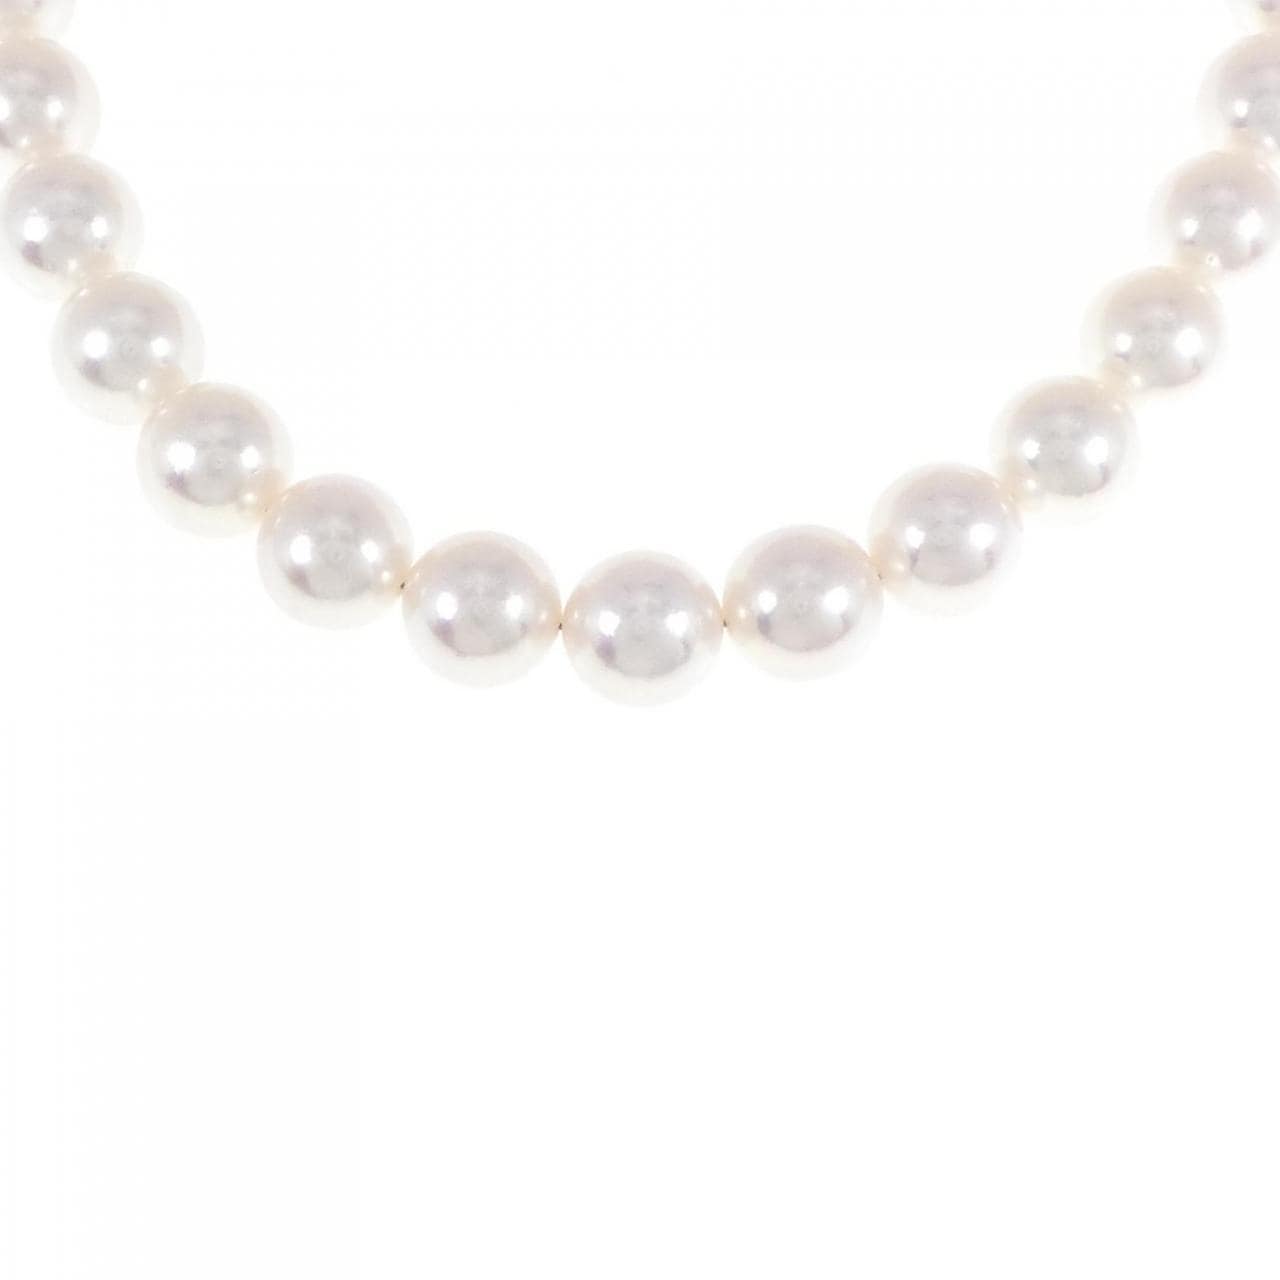 [BRAND NEW] Silver Clasp Flower Bead Akoya Pearl Necklace 9-9.5mm